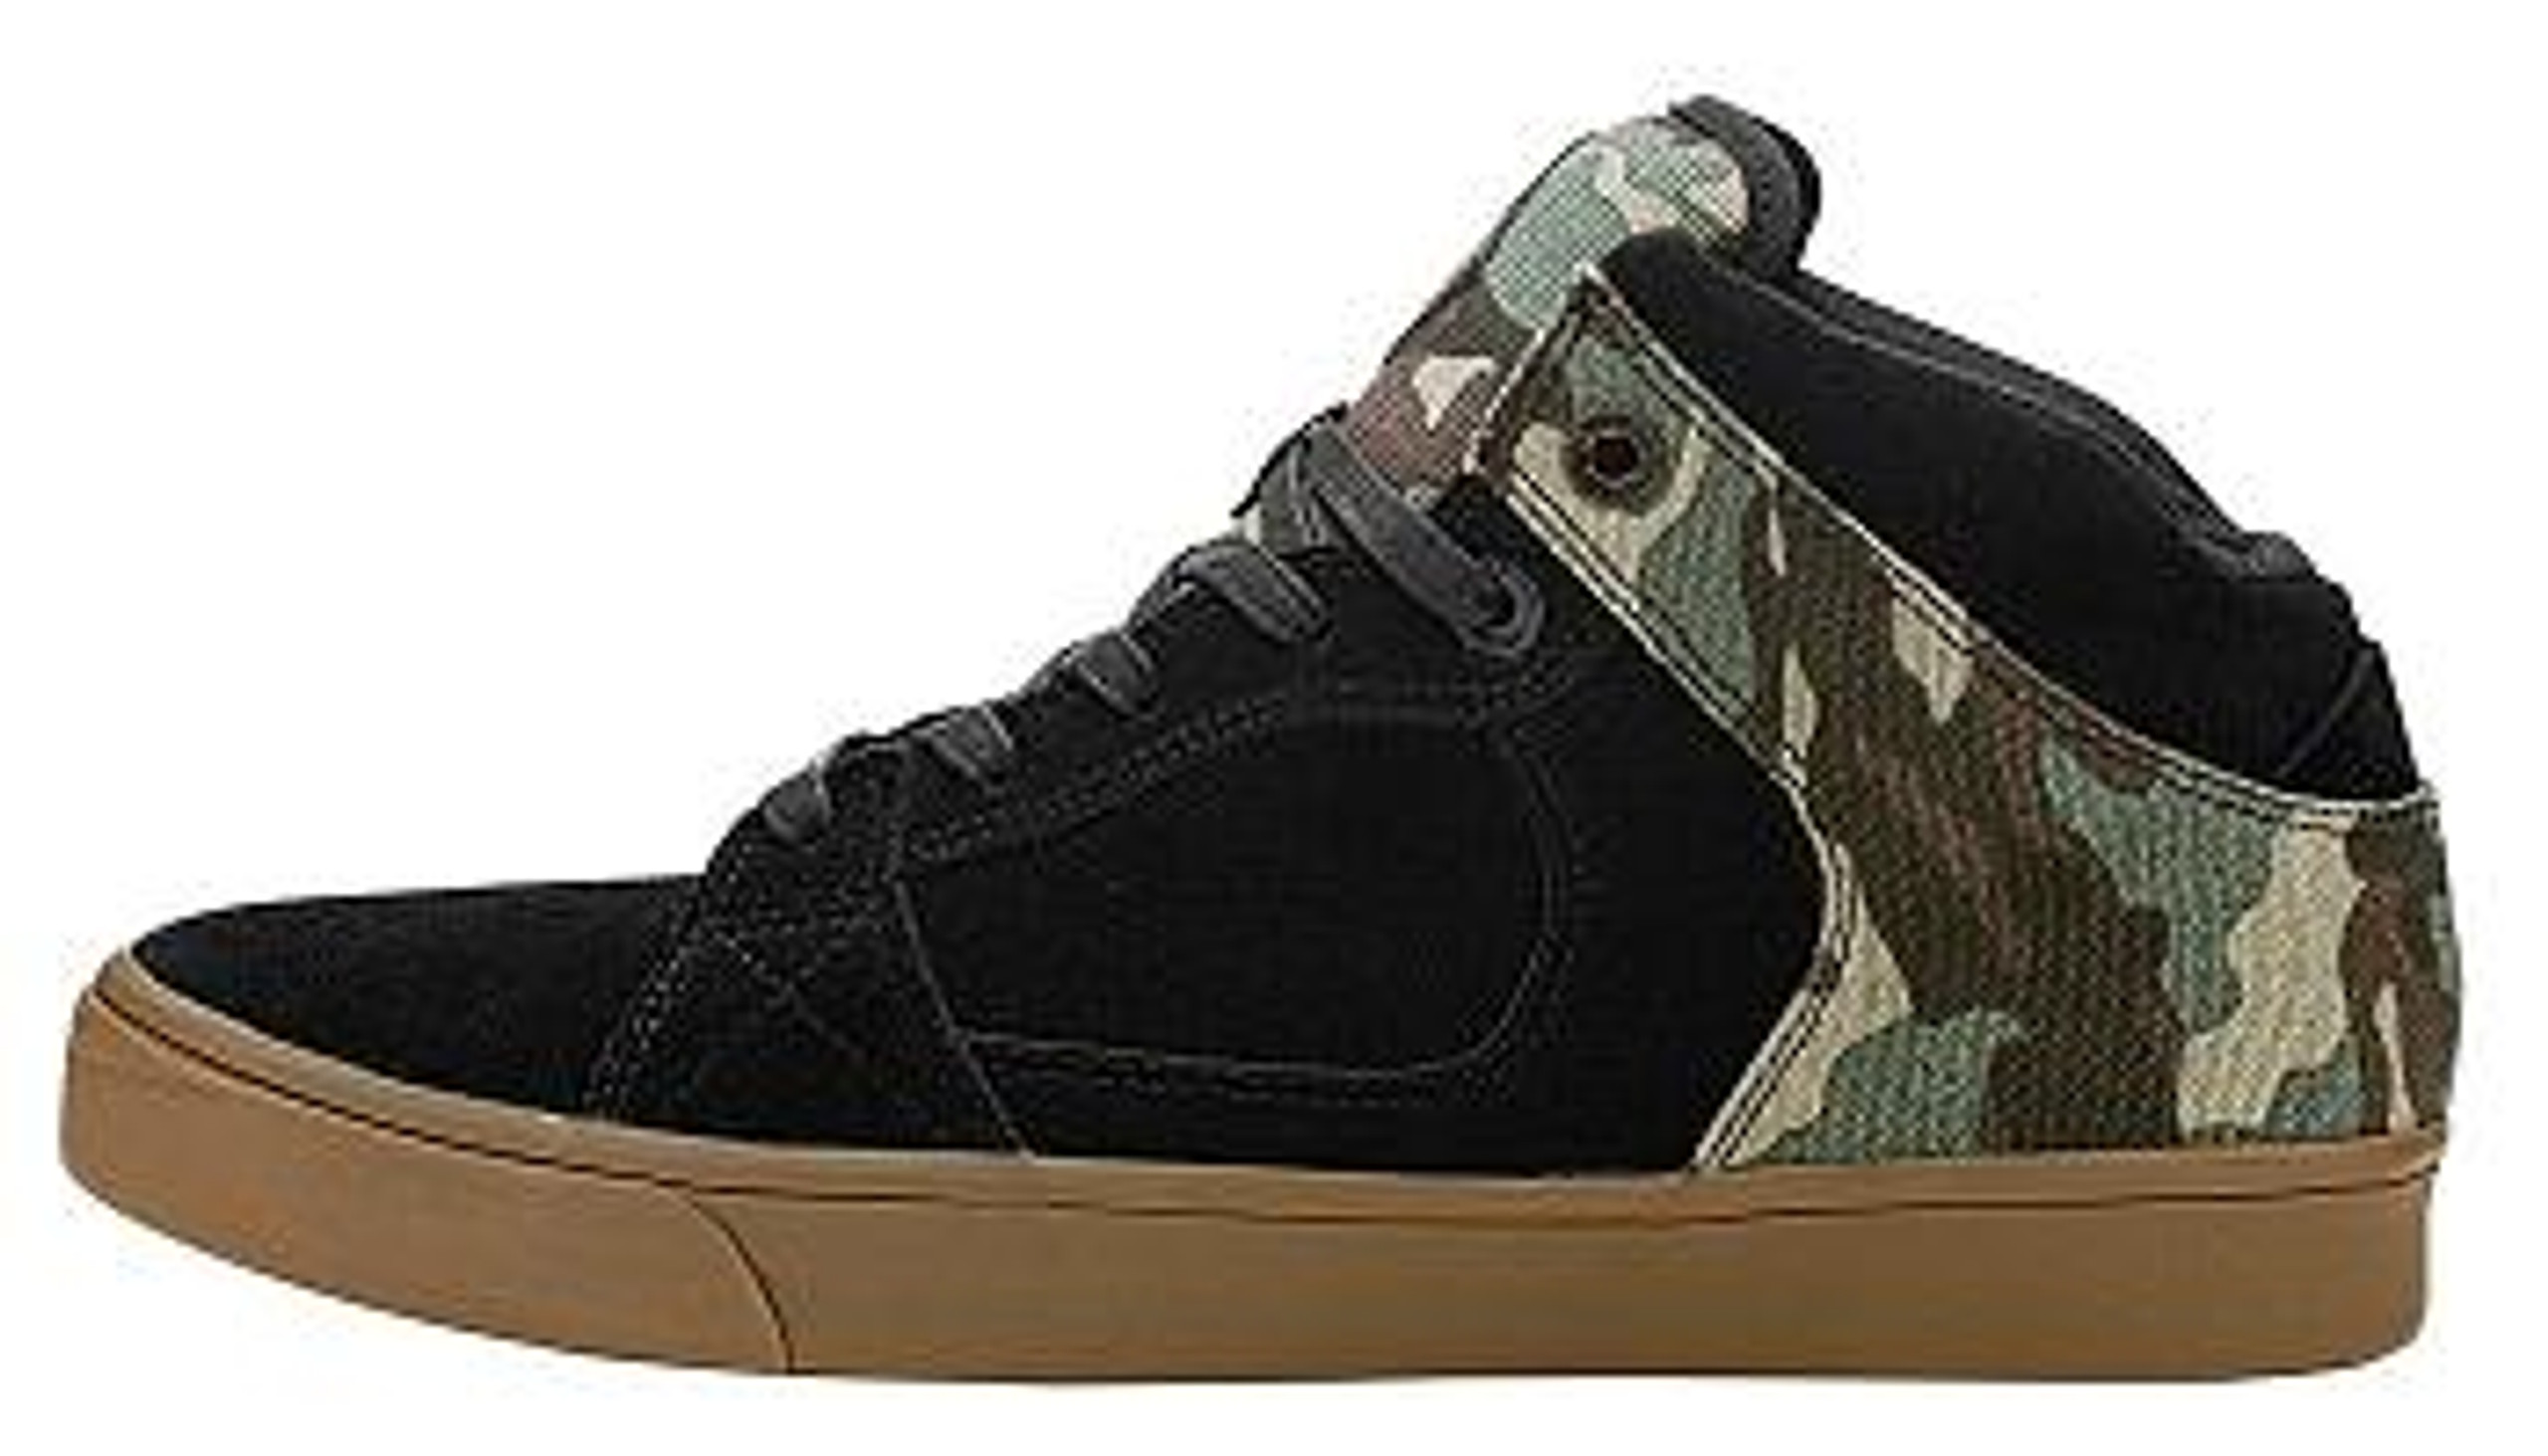 Lotek Nightwolf Mike Aitken Shoes 2015 Call to check Size ...